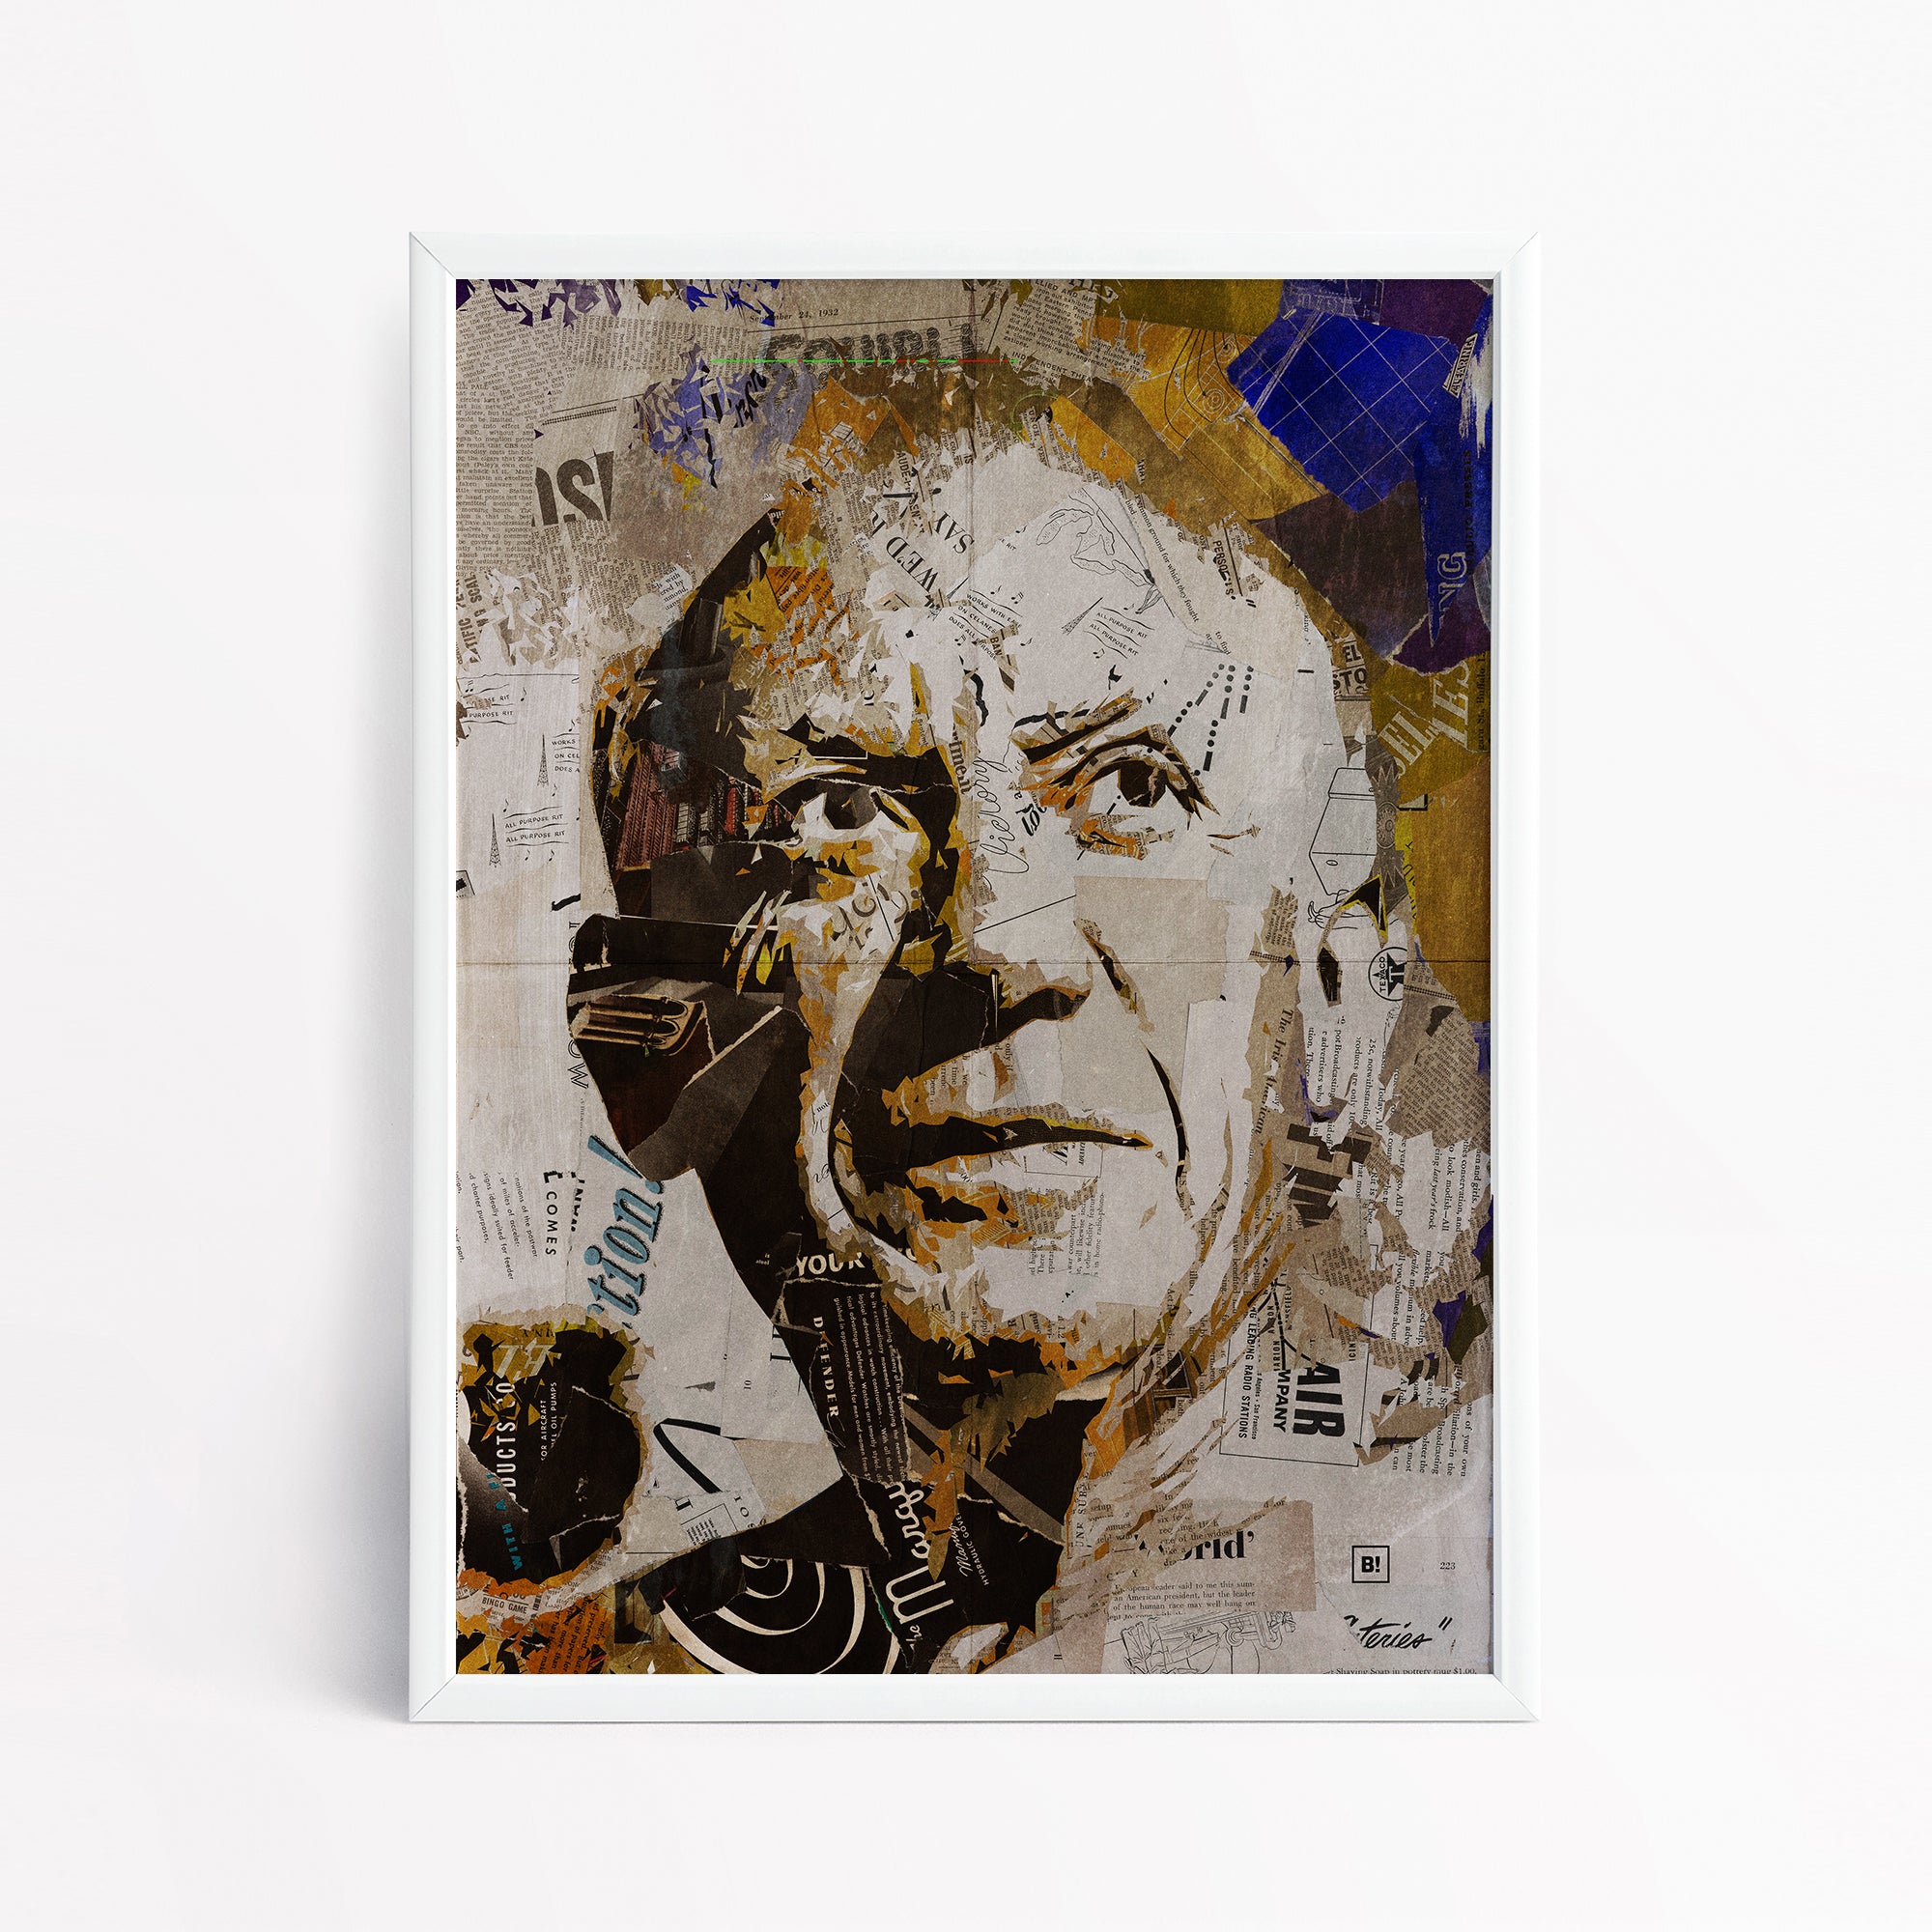 Be inspired by our iconic collage portrait art print of Pablo Picasso. This artwork has been printed using the giclée process on archival acid-free paper and is presented in a sleek white frame, showcasing its timeless beauty in every detail.